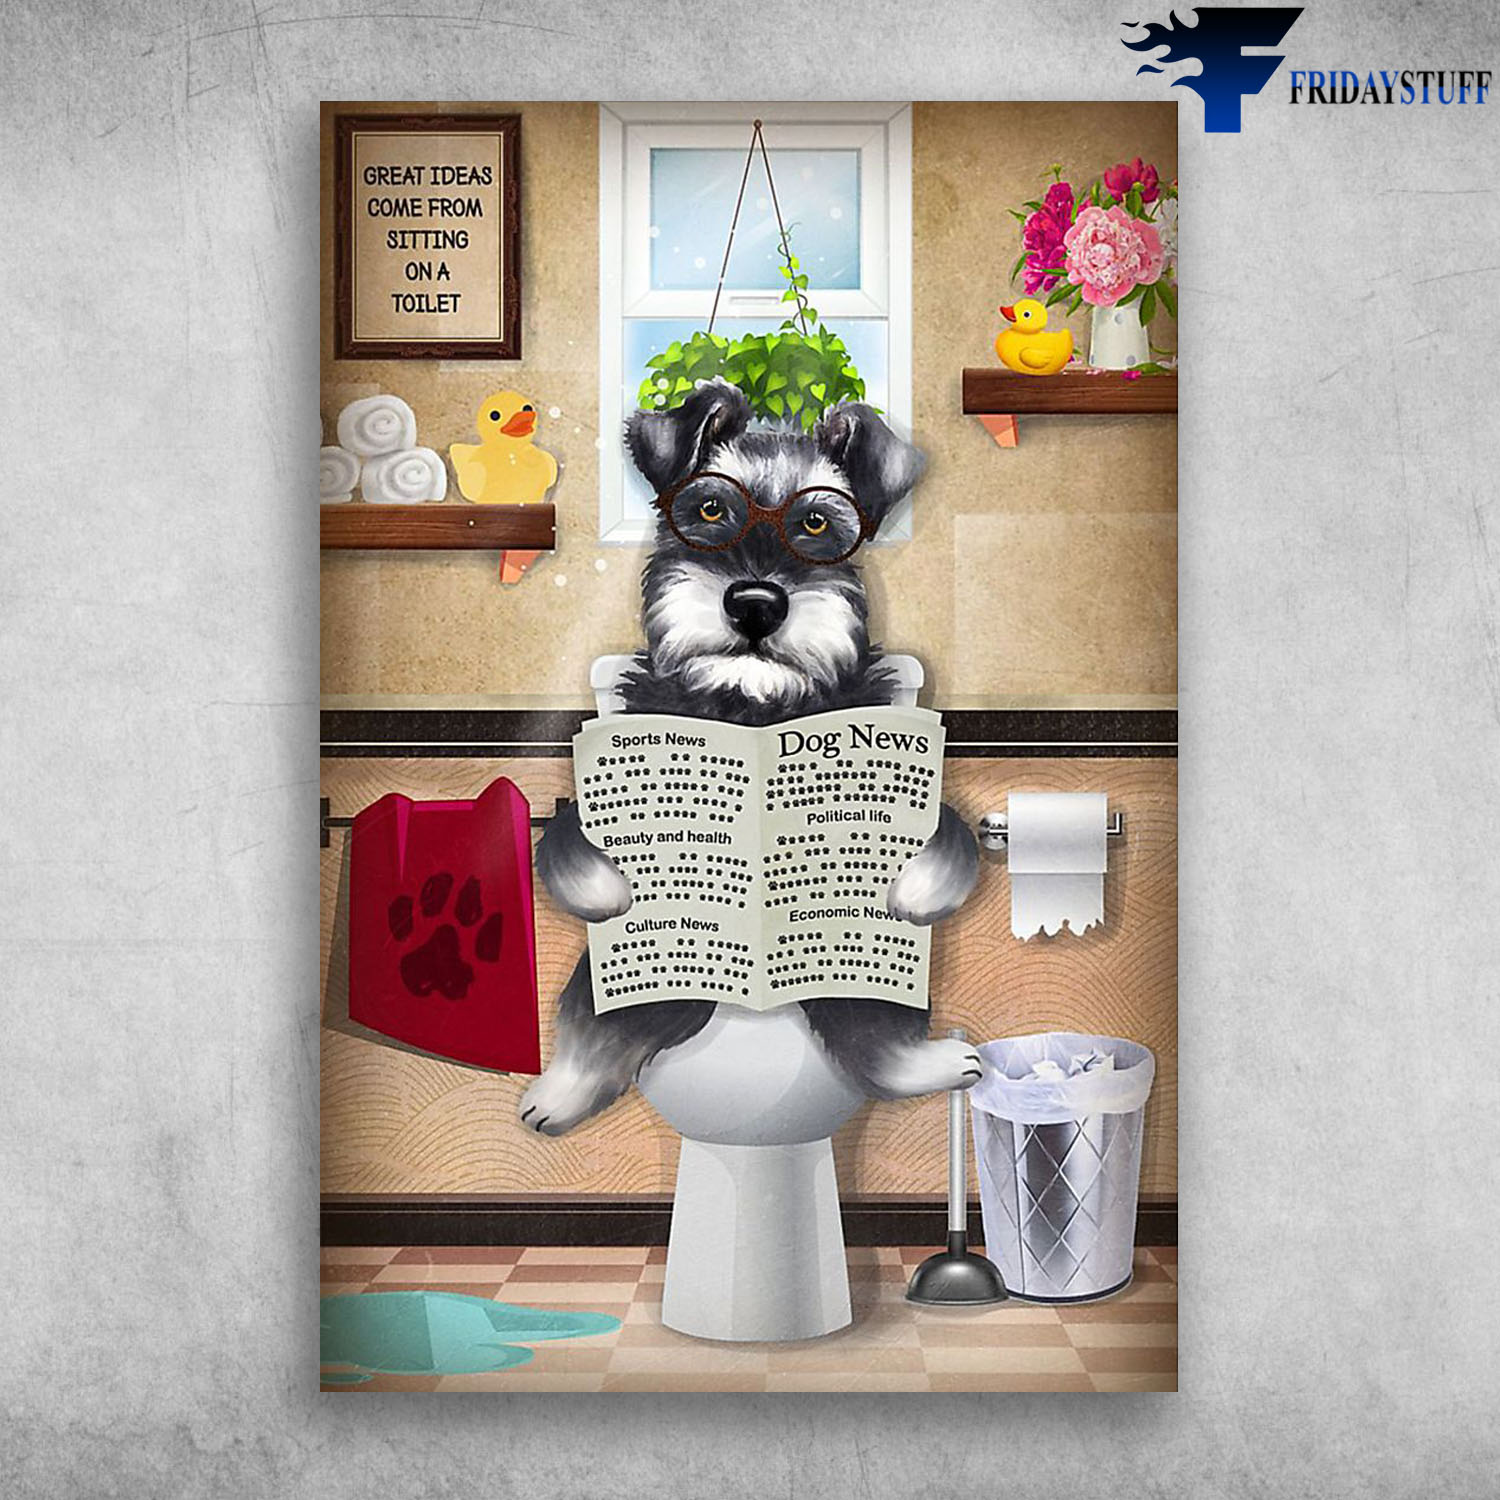 Funny Standard Schnauzer Read Newspaper In Toilet Great Ideas Come From Sitting On A Toilet